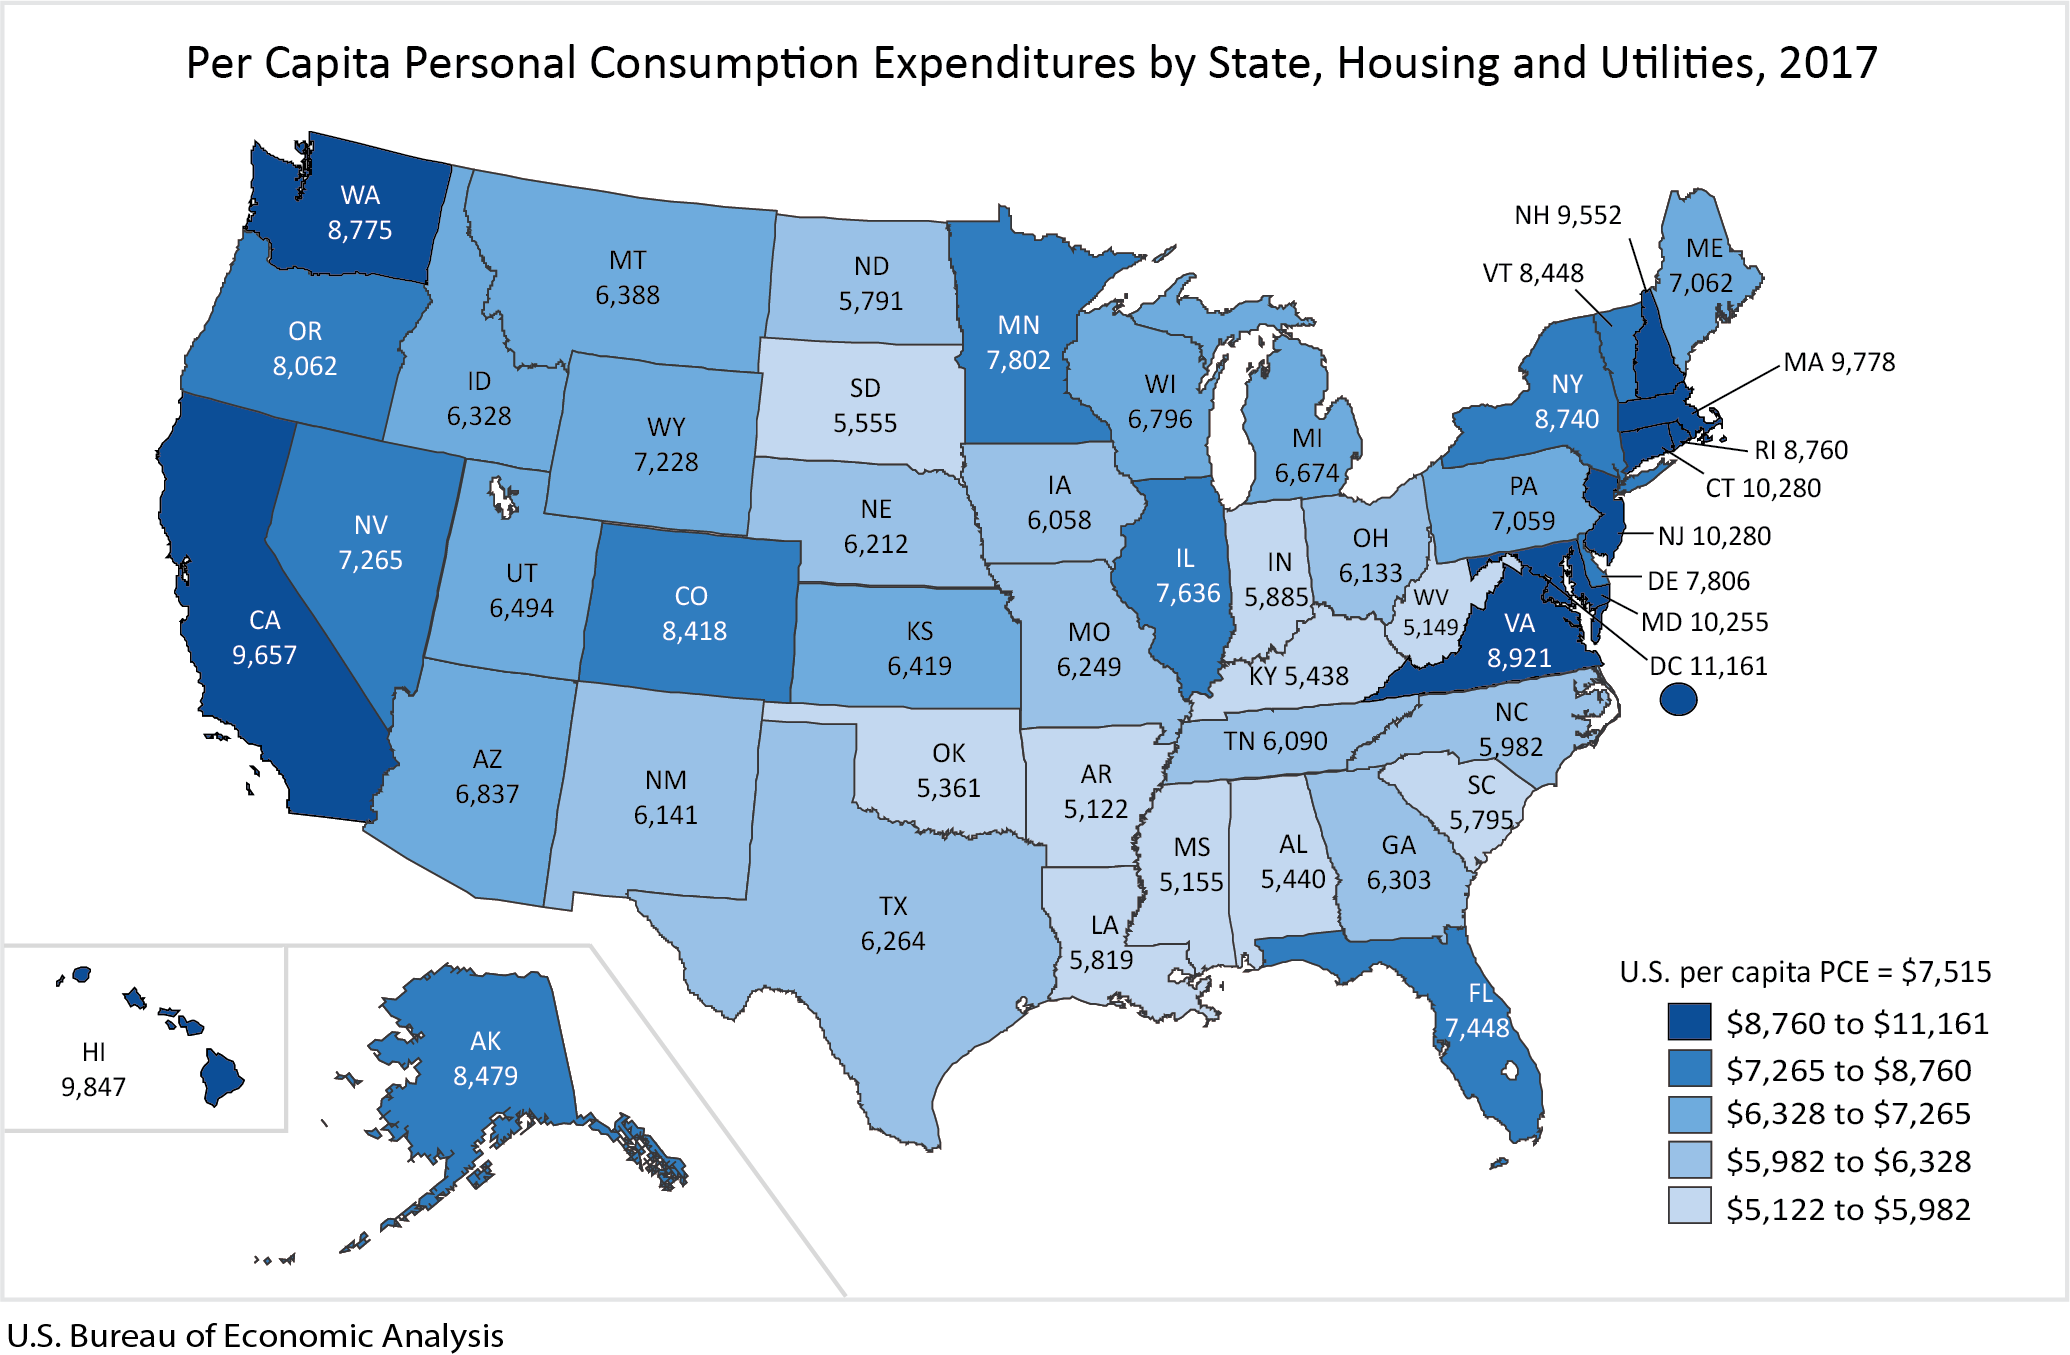 Per Capita Personal Consumption Expenditures by State, Housing and Utilities 2017